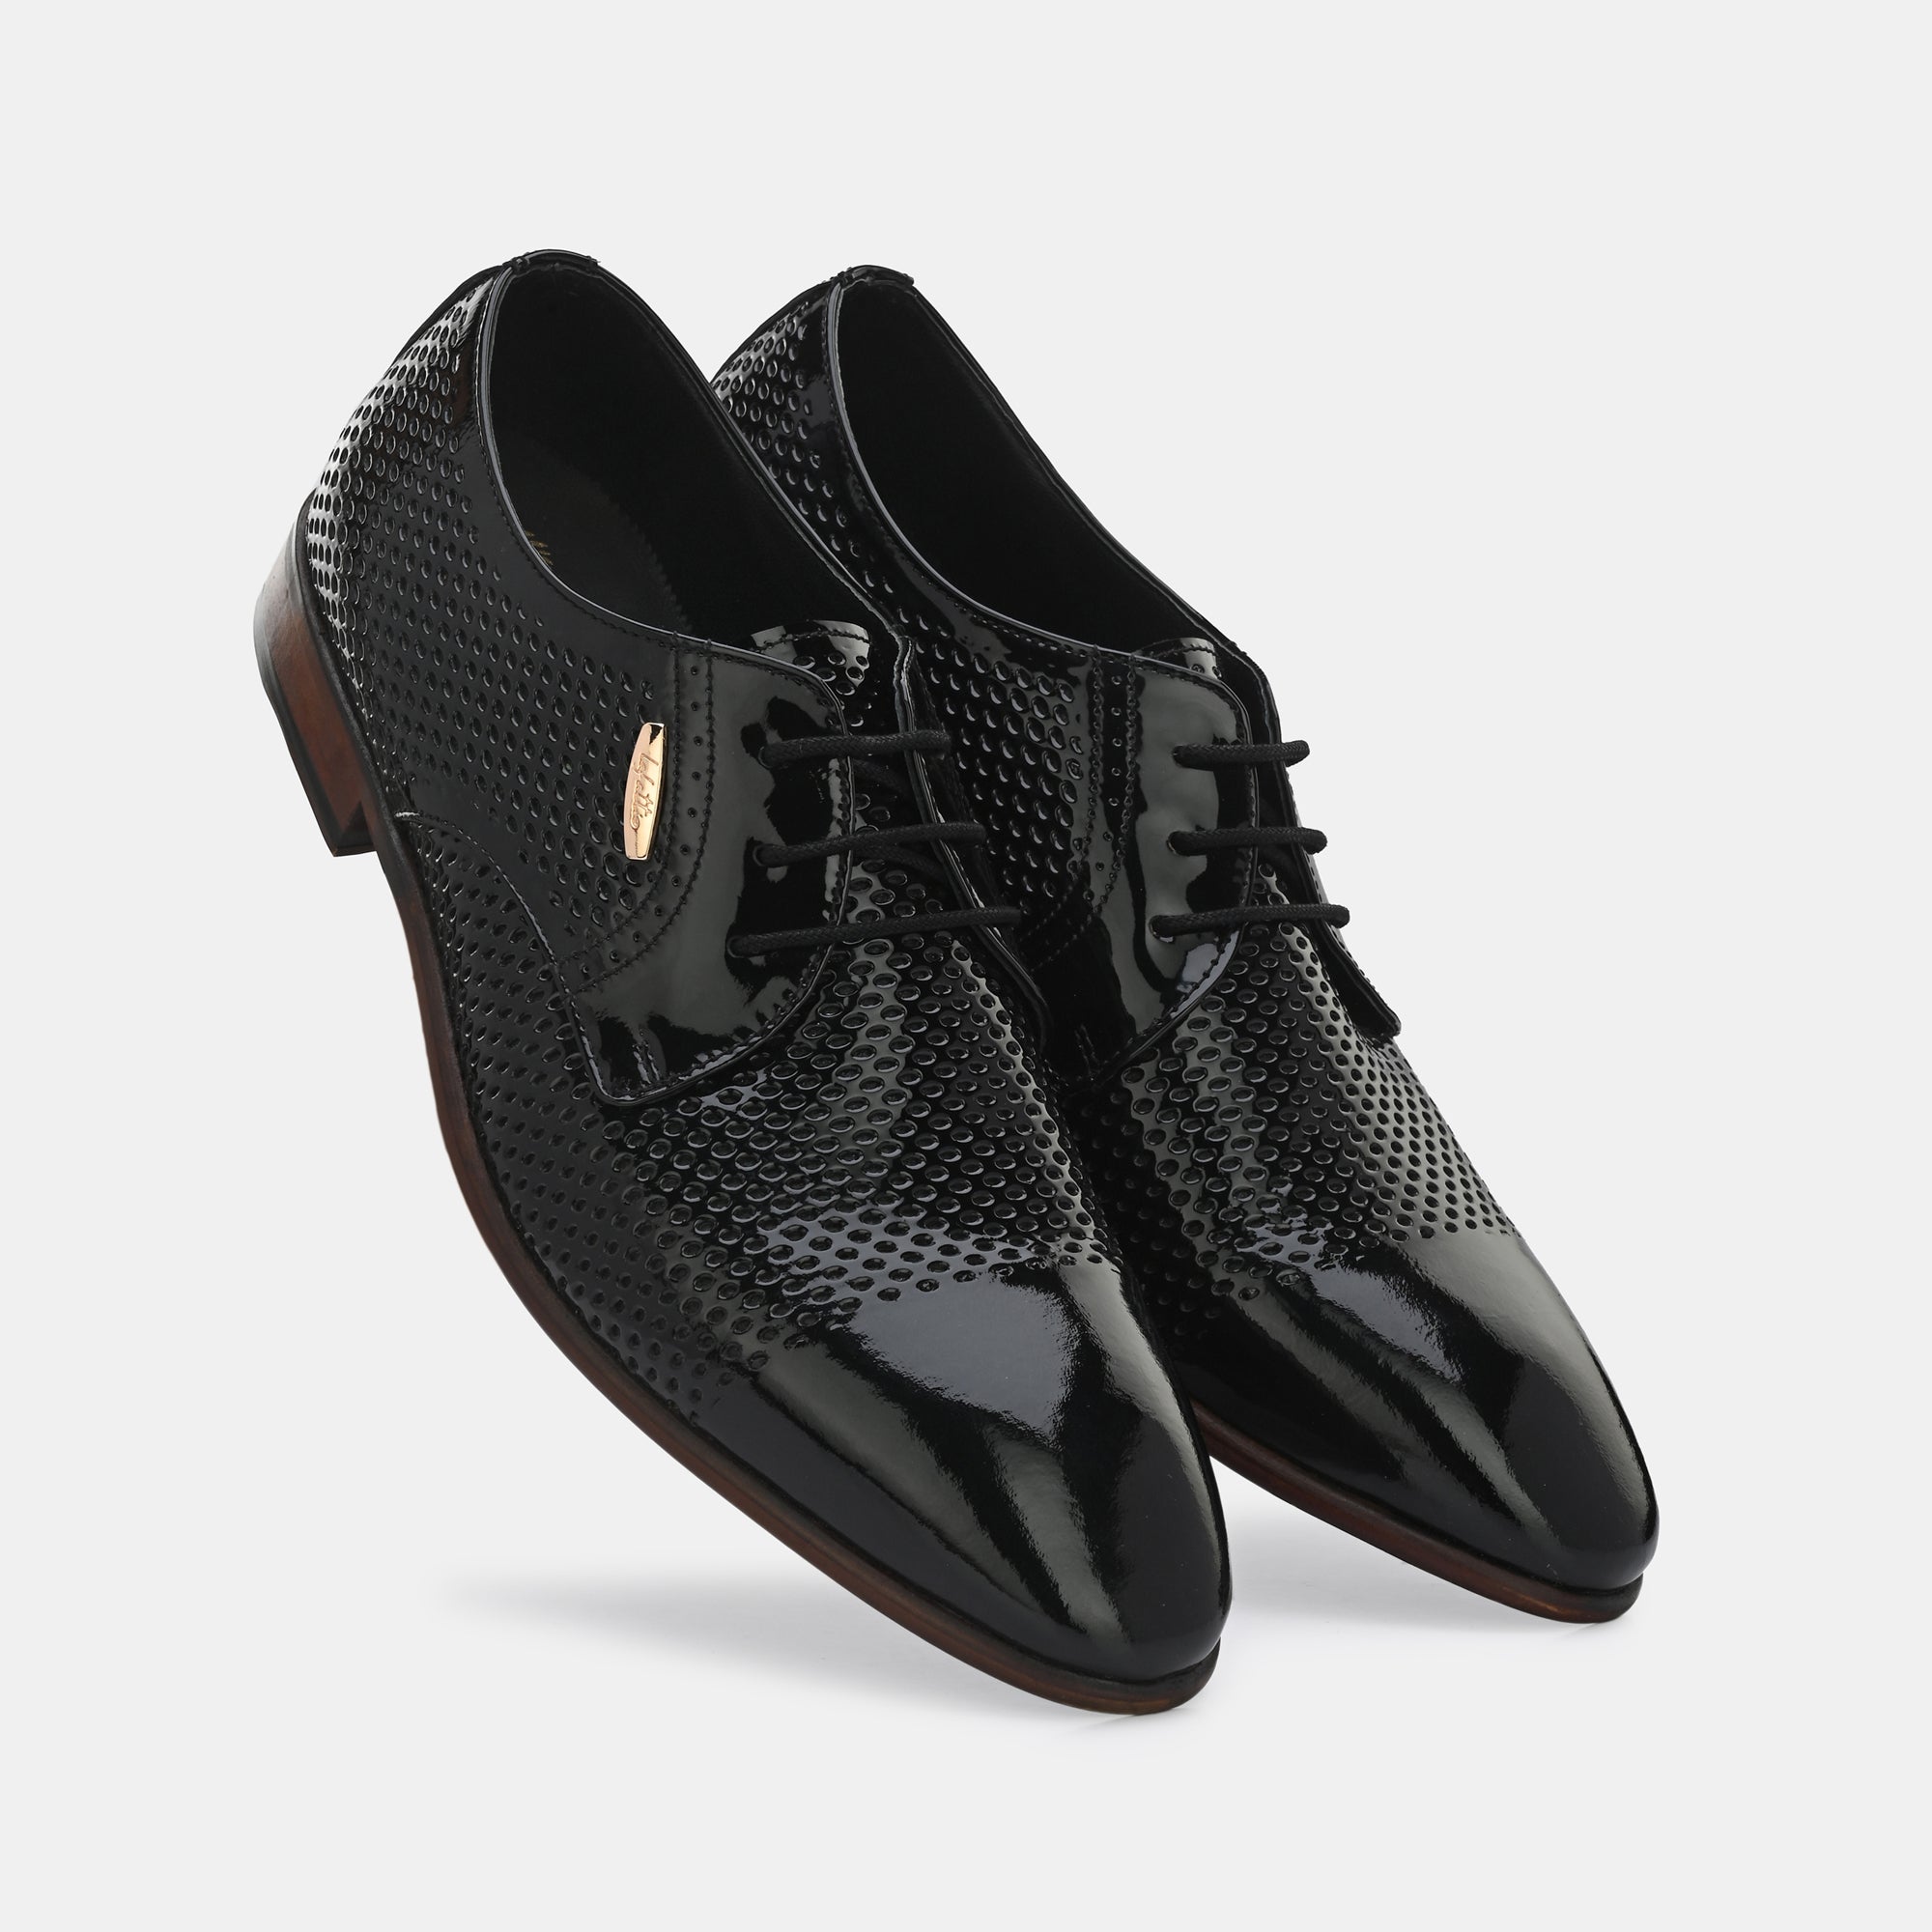 Patent Black Perforated Lace-Up Shoes by Lafattio